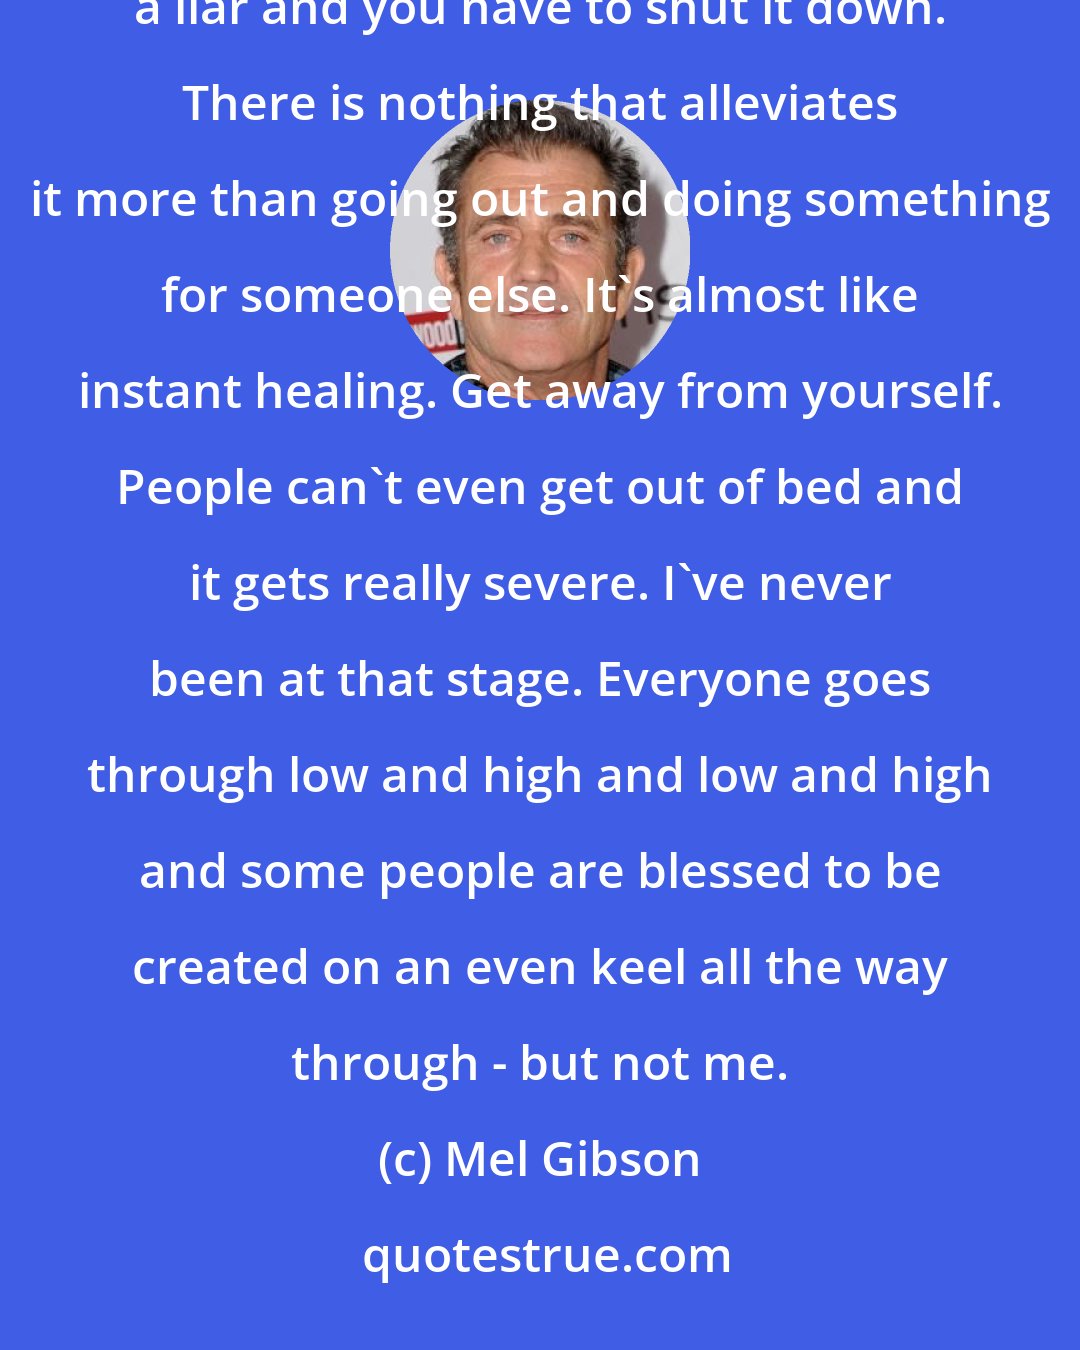 Mel Gibson: A guy said to me one time, something really profound, and it's so simple. It's that depression lies. It's a liar and you have to shut it down. There is nothing that alleviates it more than going out and doing something for someone else. It's almost like instant healing. Get away from yourself. People can't even get out of bed and it gets really severe. I've never been at that stage. Everyone goes through low and high and low and high and some people are blessed to be created on an even keel all the way through - but not me.